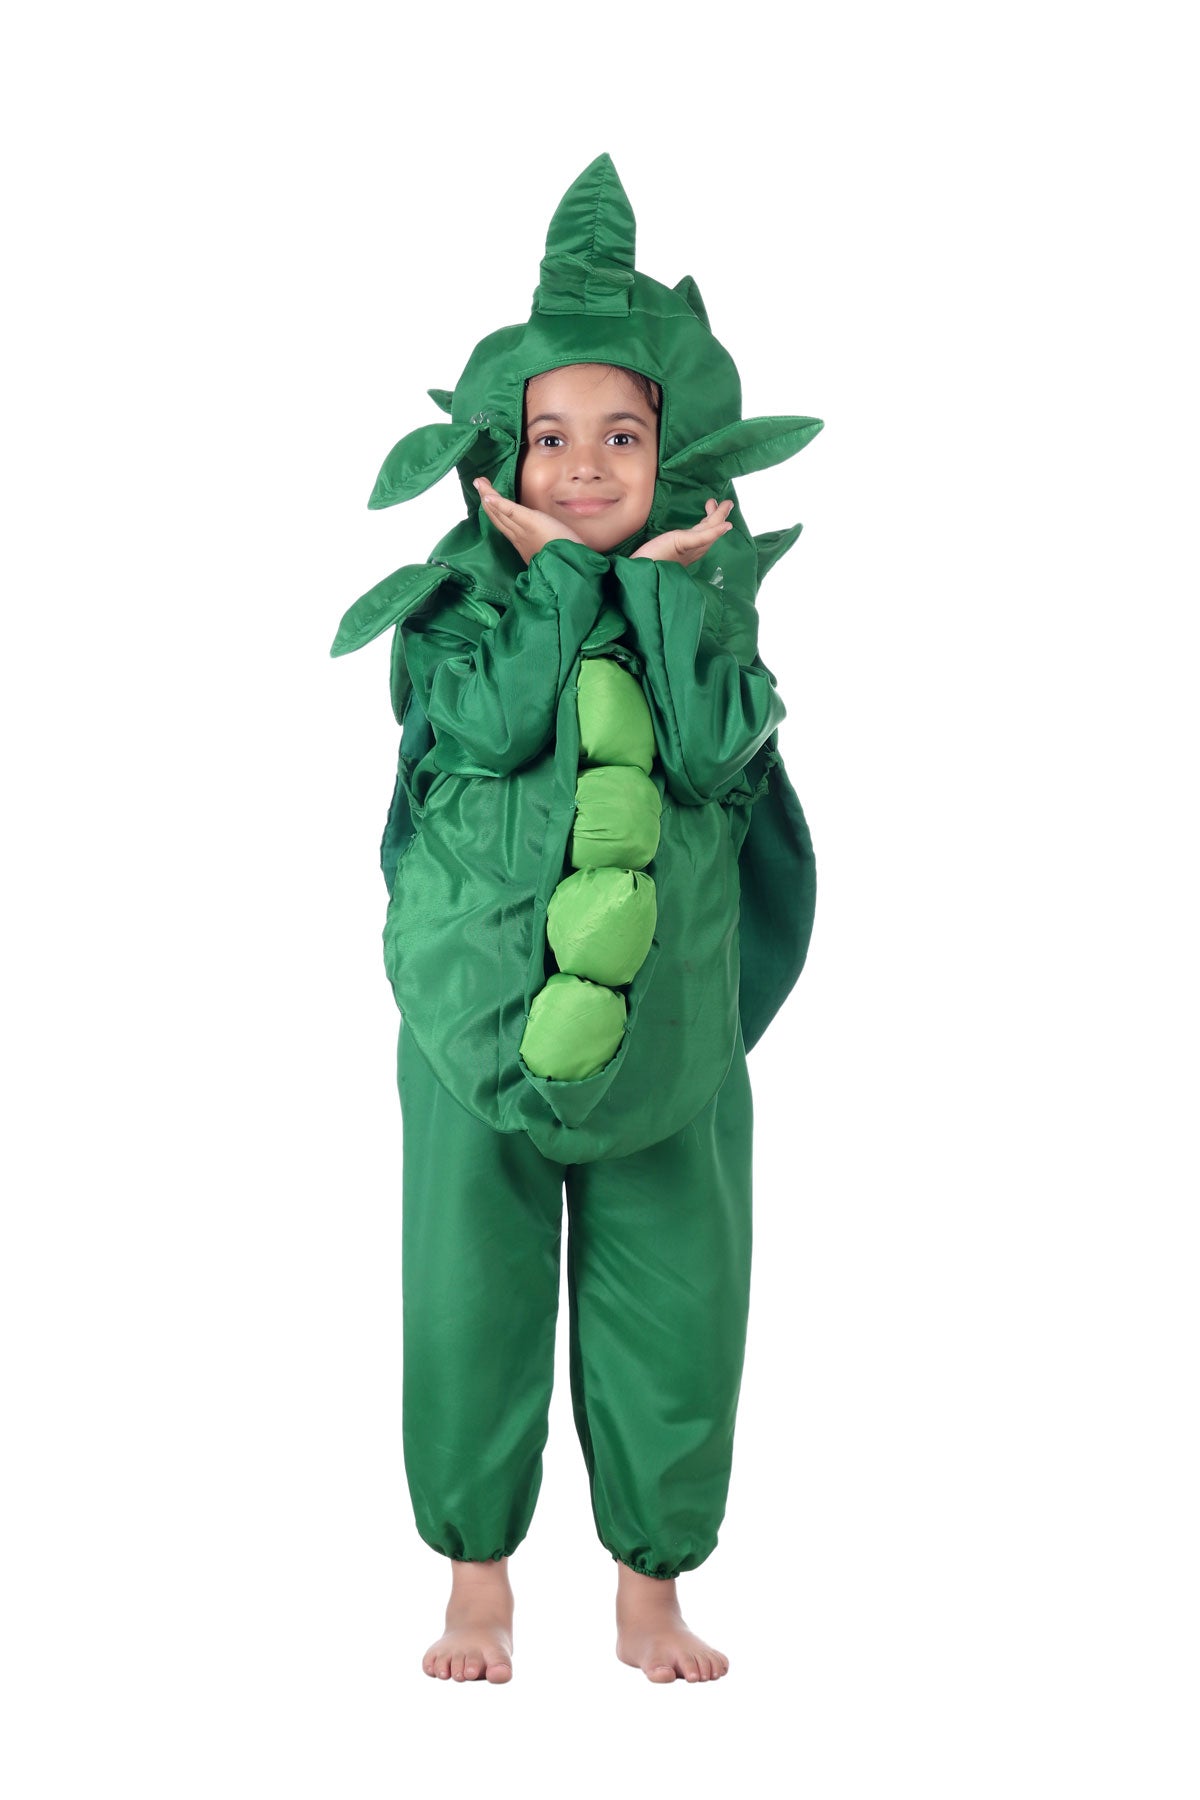 Poonam Fashion World Fruits and vegetable fancy Dress costume for Kids  Costume Wear cutout (Pomegranate)